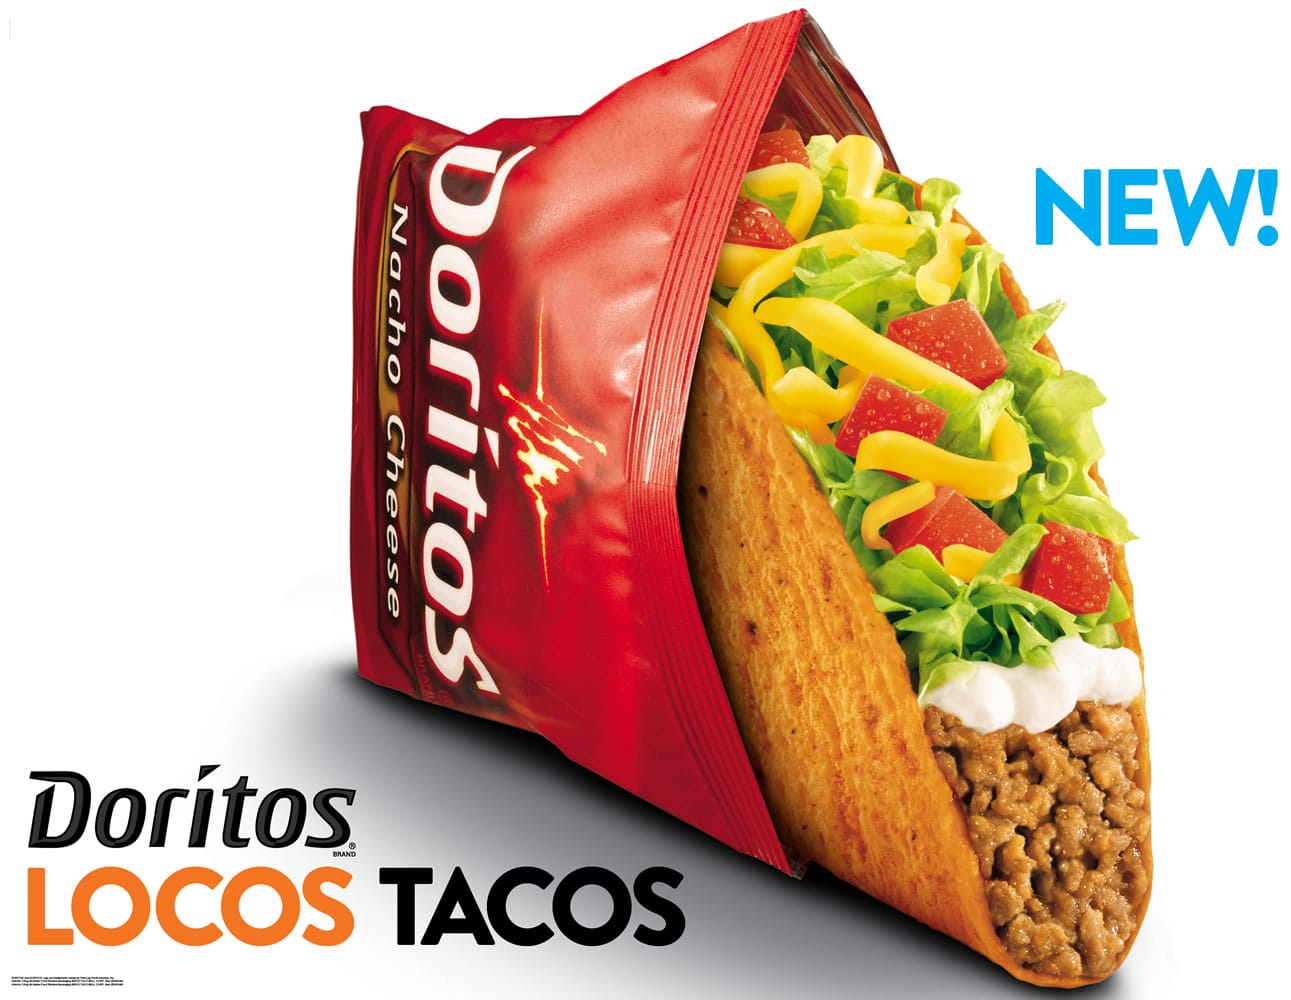 A new advertisement for Doritos Locos Tacos shells. PepsiCo Inc., which owns Cheetos, Fritos, Tostitos and other snacks, found enormous success in 2012 after teaming up with Taco Bell to create Dorito-flavored taco shells.